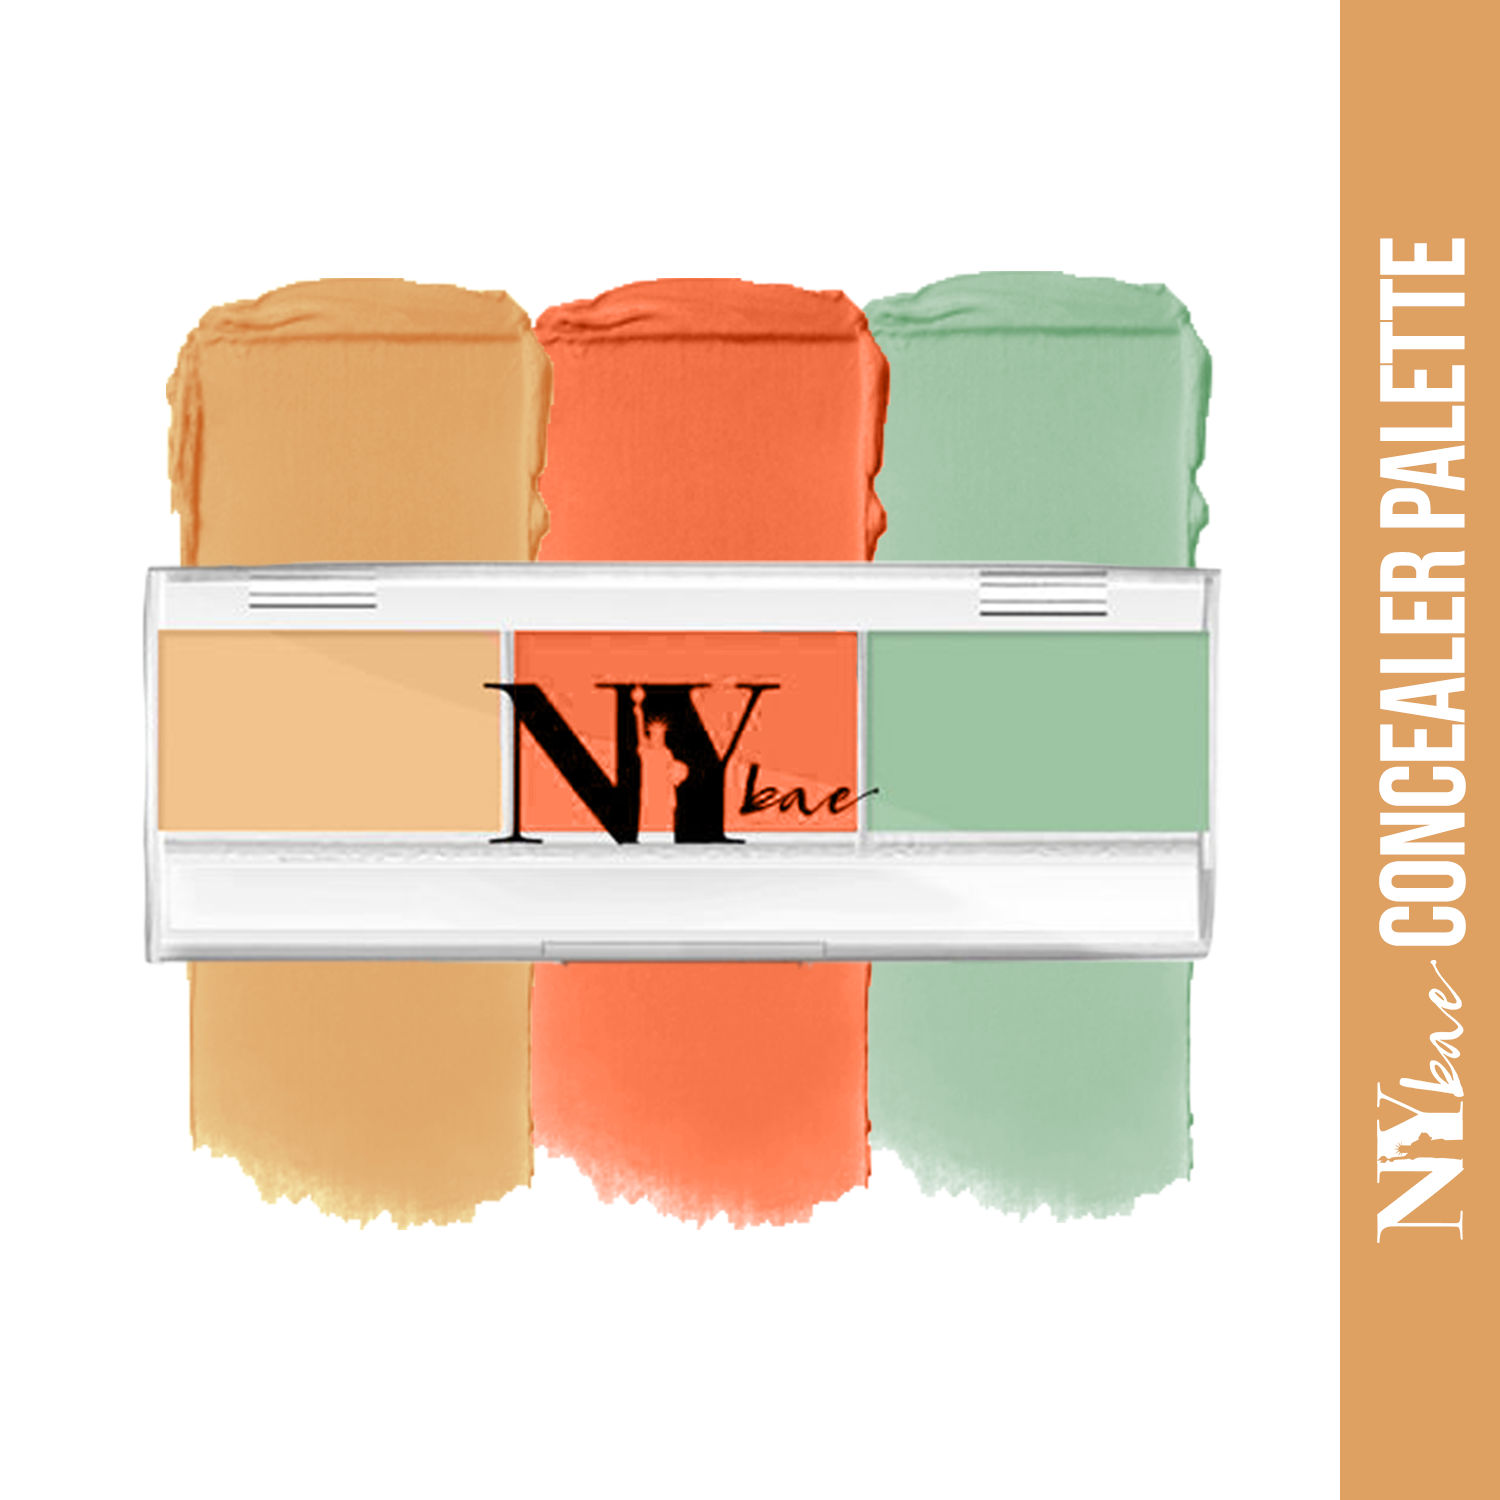 Buy NY Bae Concealer with Orange & Green Color Corrector Palette, For Wheatish Skin, Maskin' at Manhattan - Almond at Top of the Rock 3 (1.5 g X 3) - Purplle